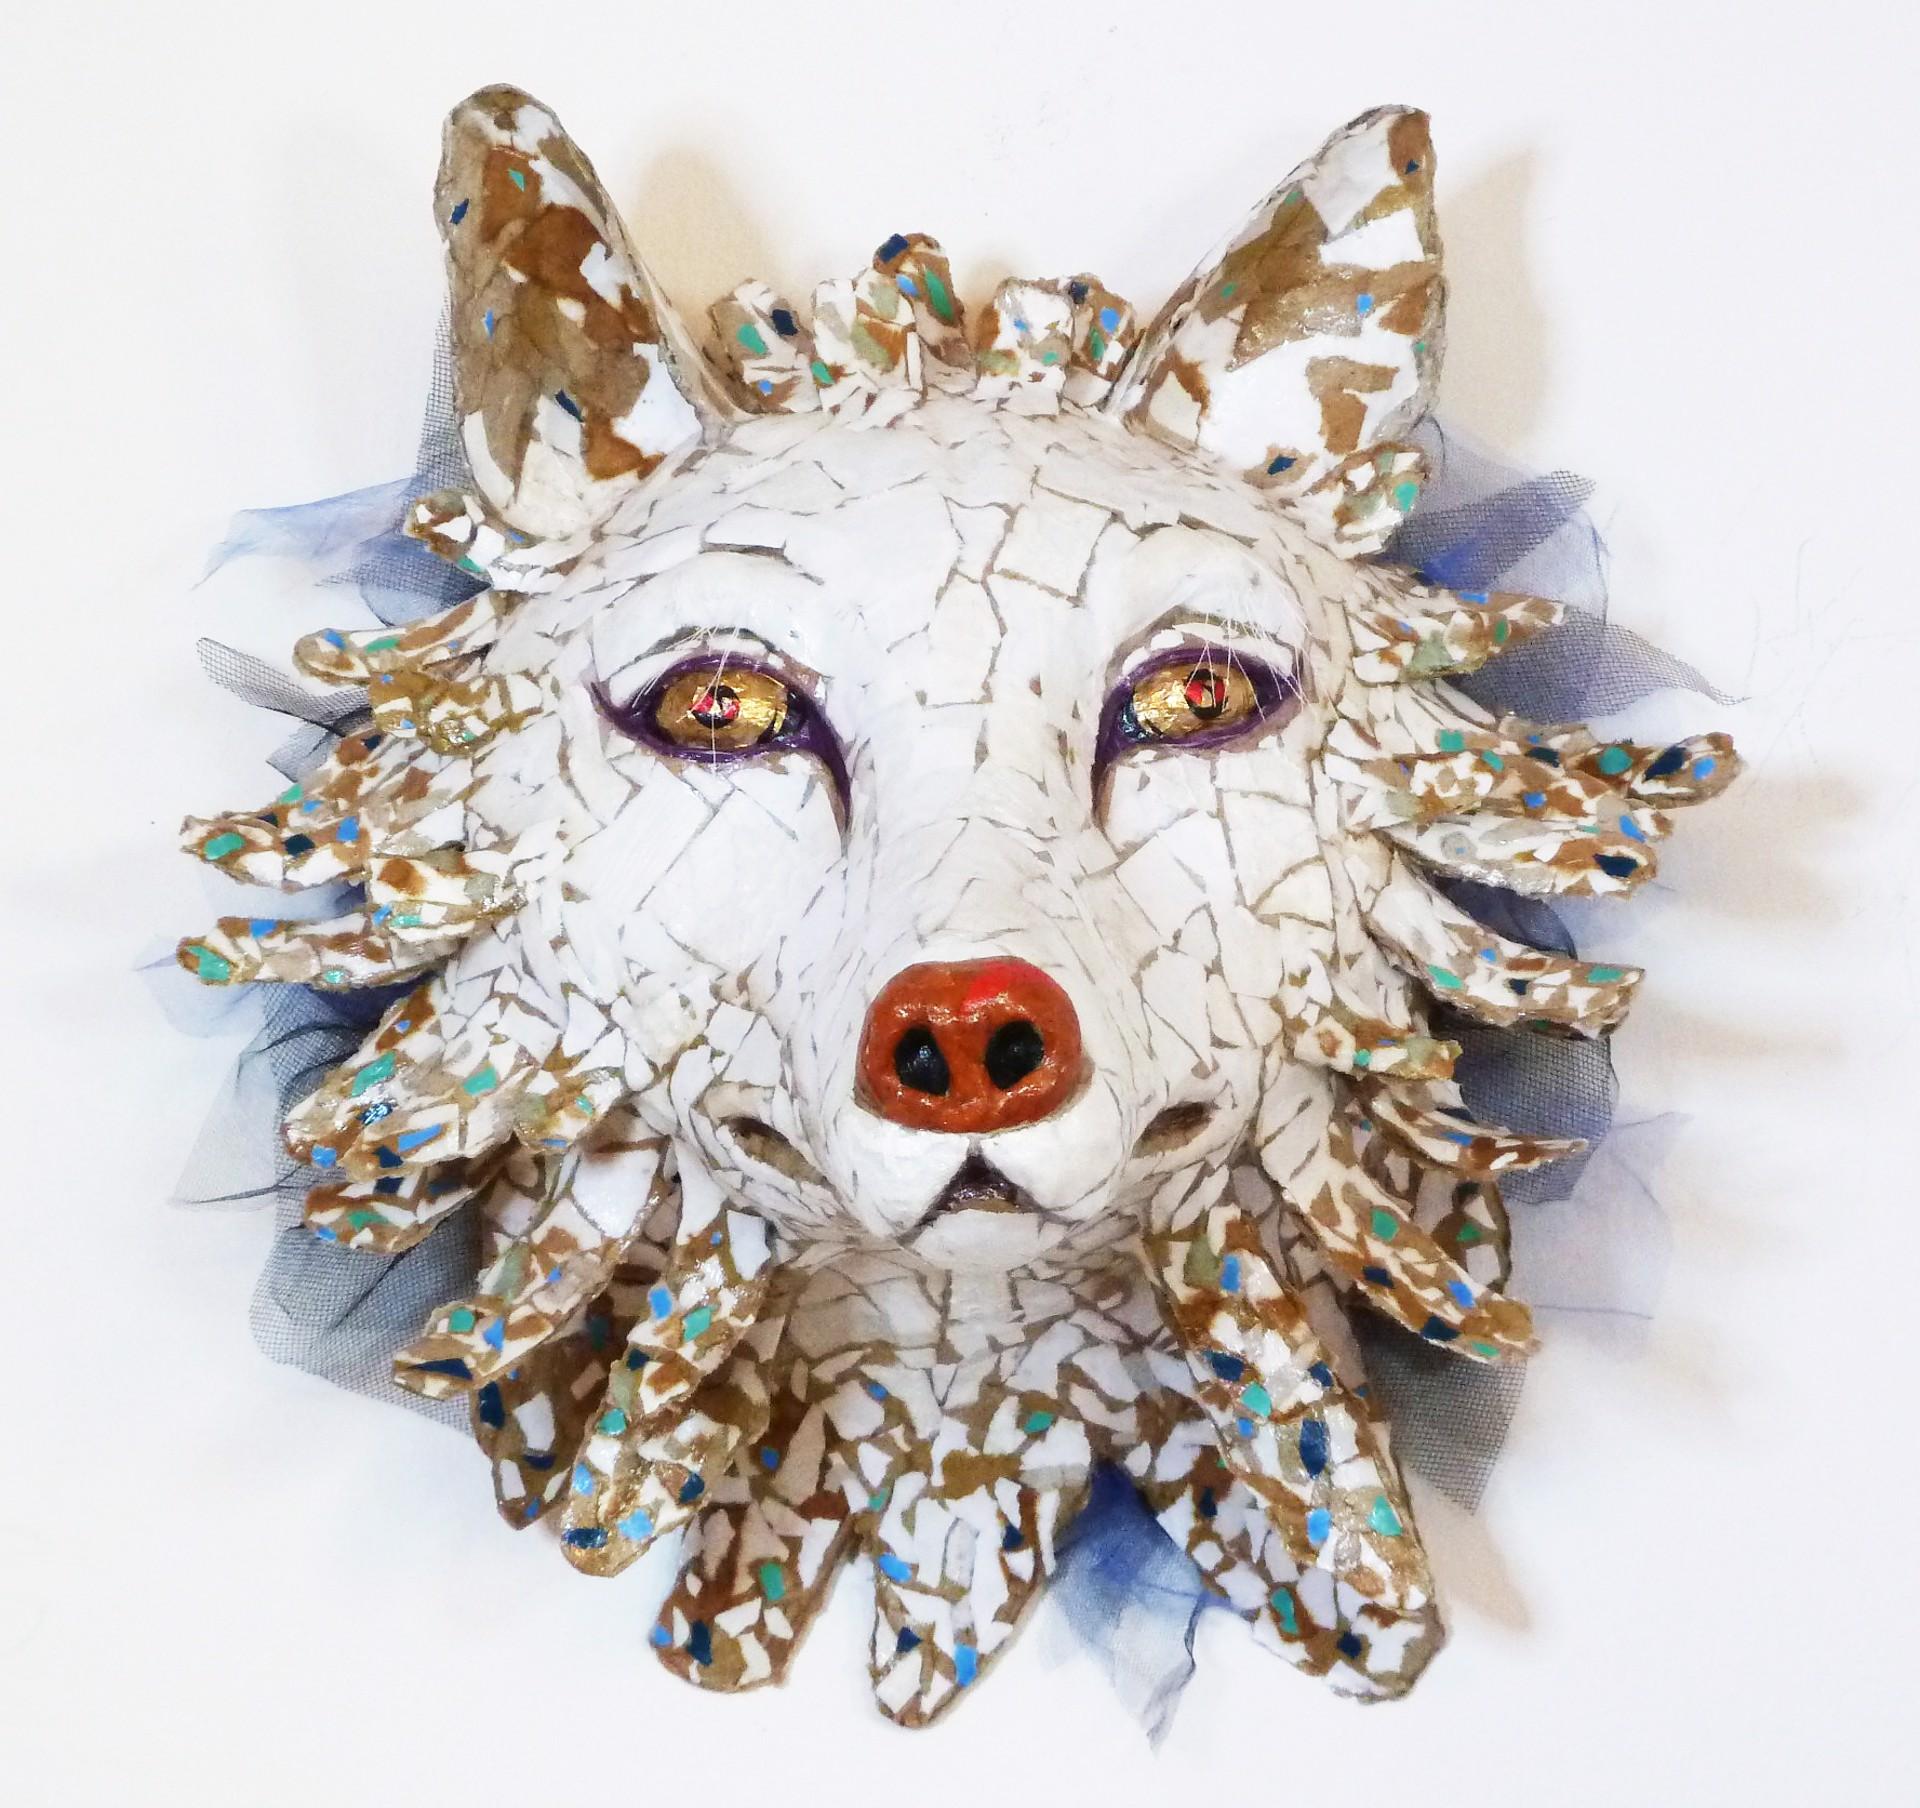 Archie  - Incredible Artic Wolf Wall Sculpture Up-cycled in White & Blue) - Contemporary Mixed Media Art by Yulia Shtern